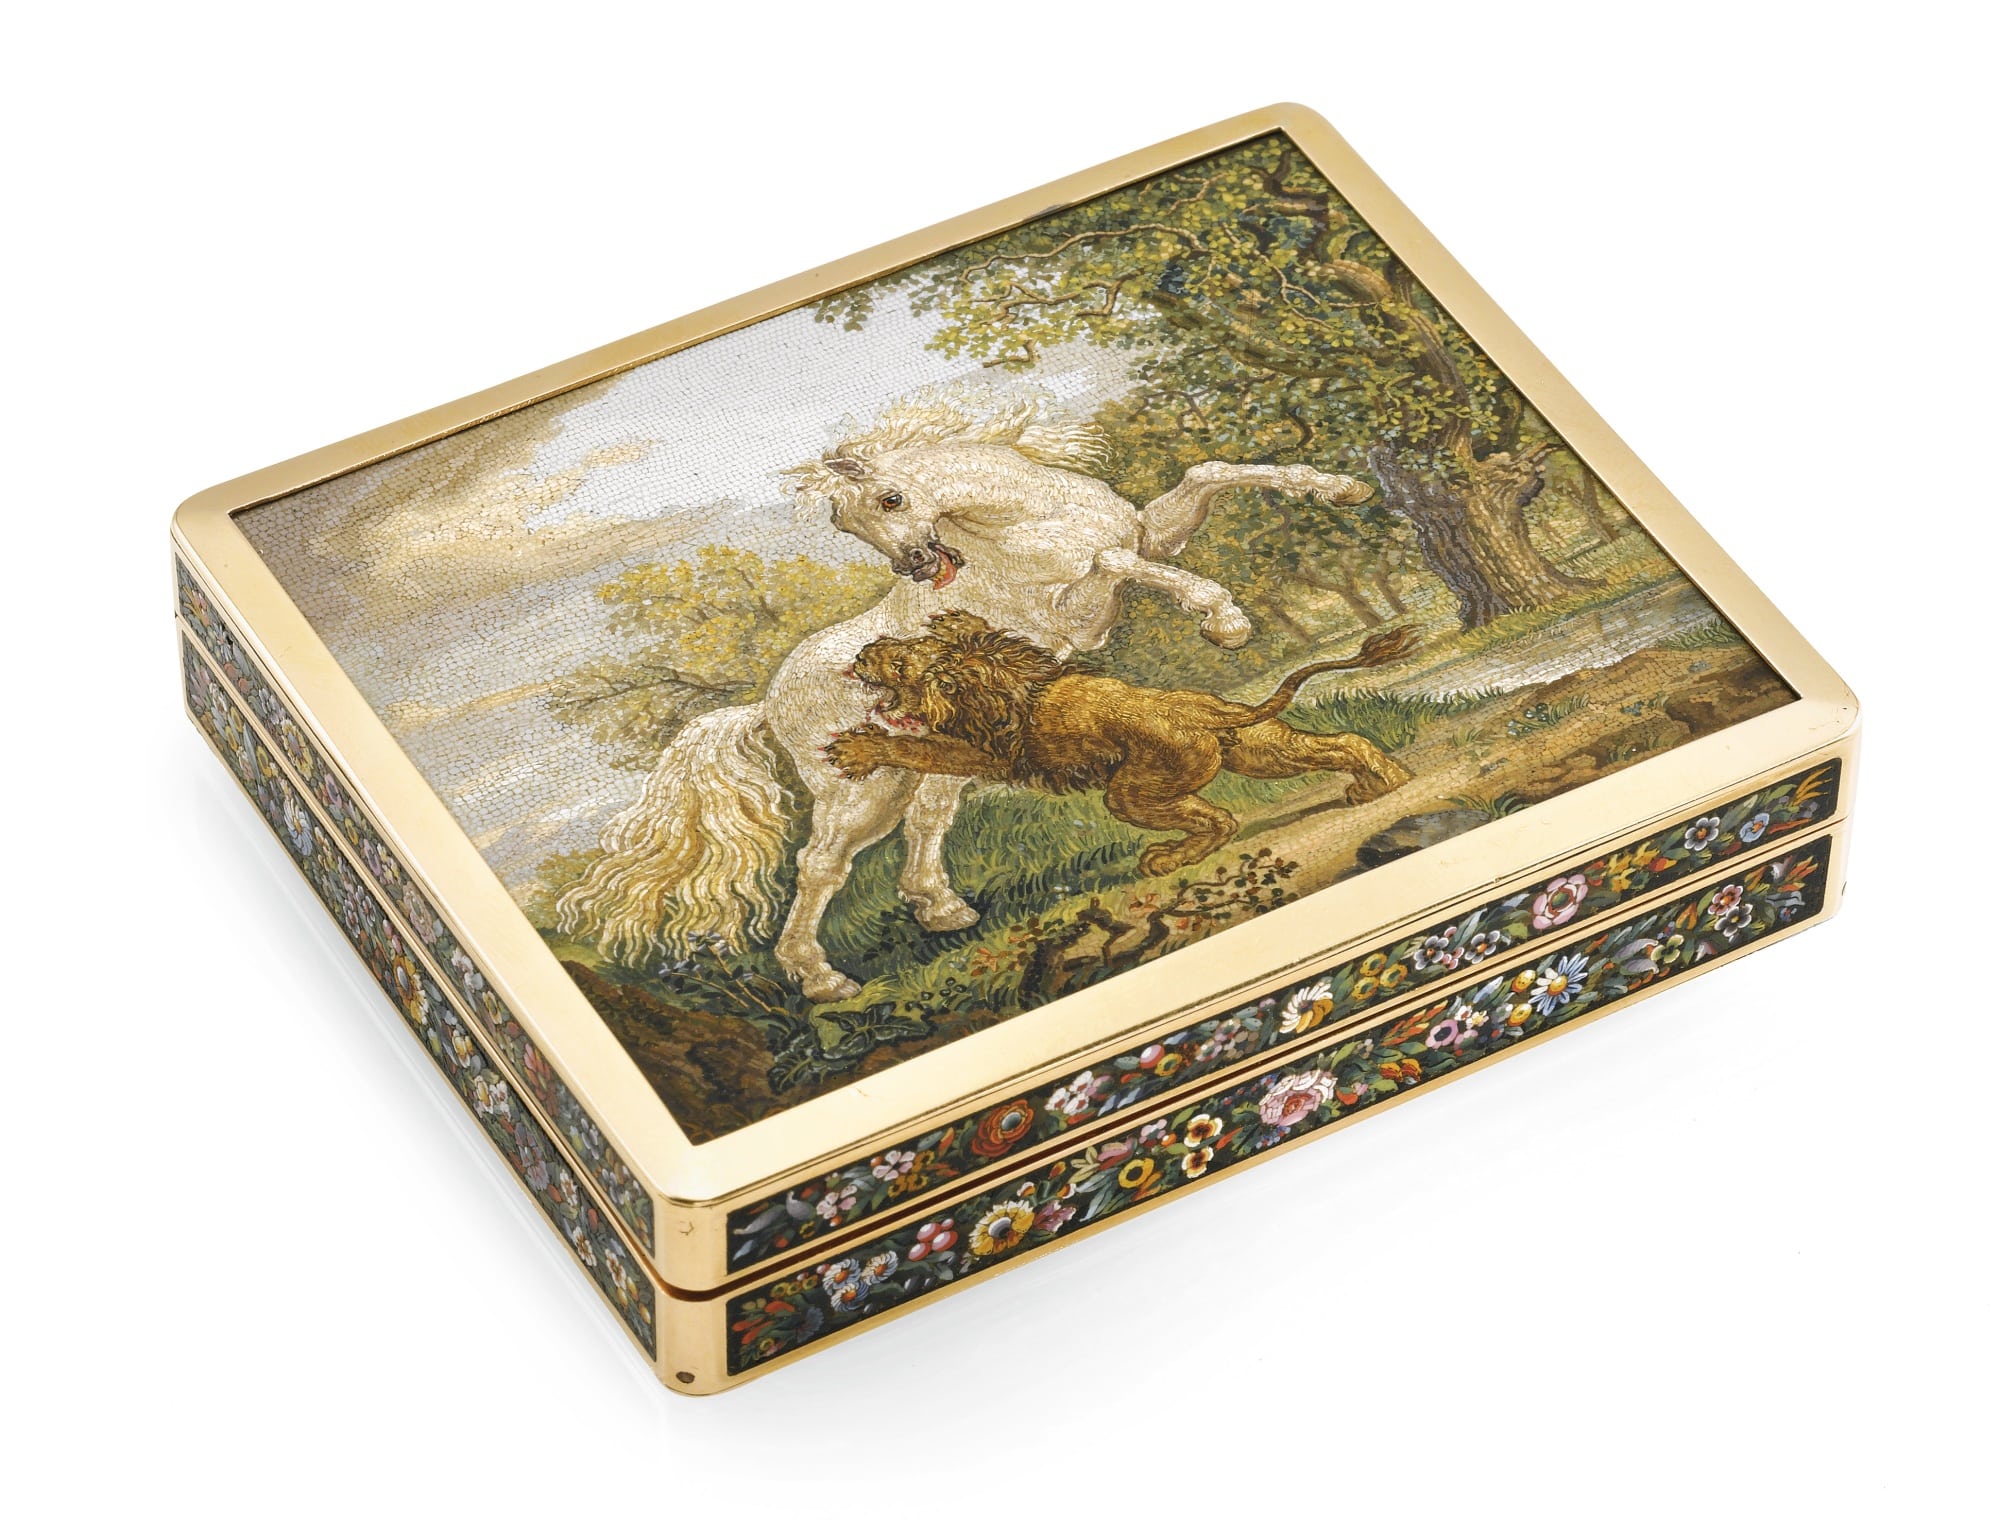 A Snuff Box with Micromosaic Attributed to Filipo Puglieschi, Rome, (panels c.1810) Photo Courtesy of Sotheby’s.